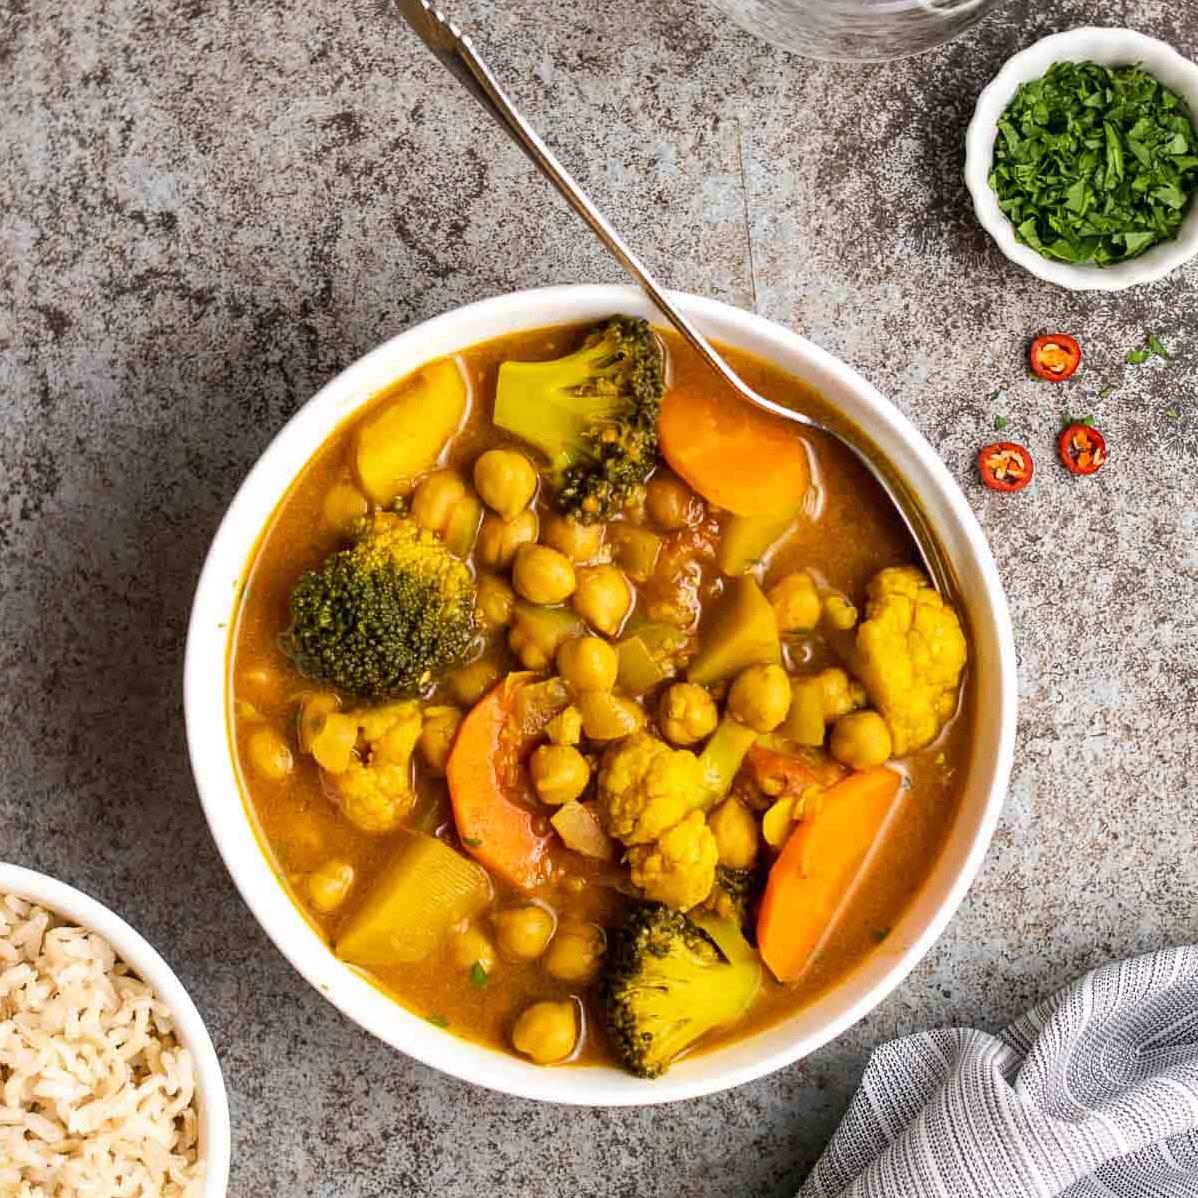  A curry that's complex in flavor, but easy to make in your own kitchen